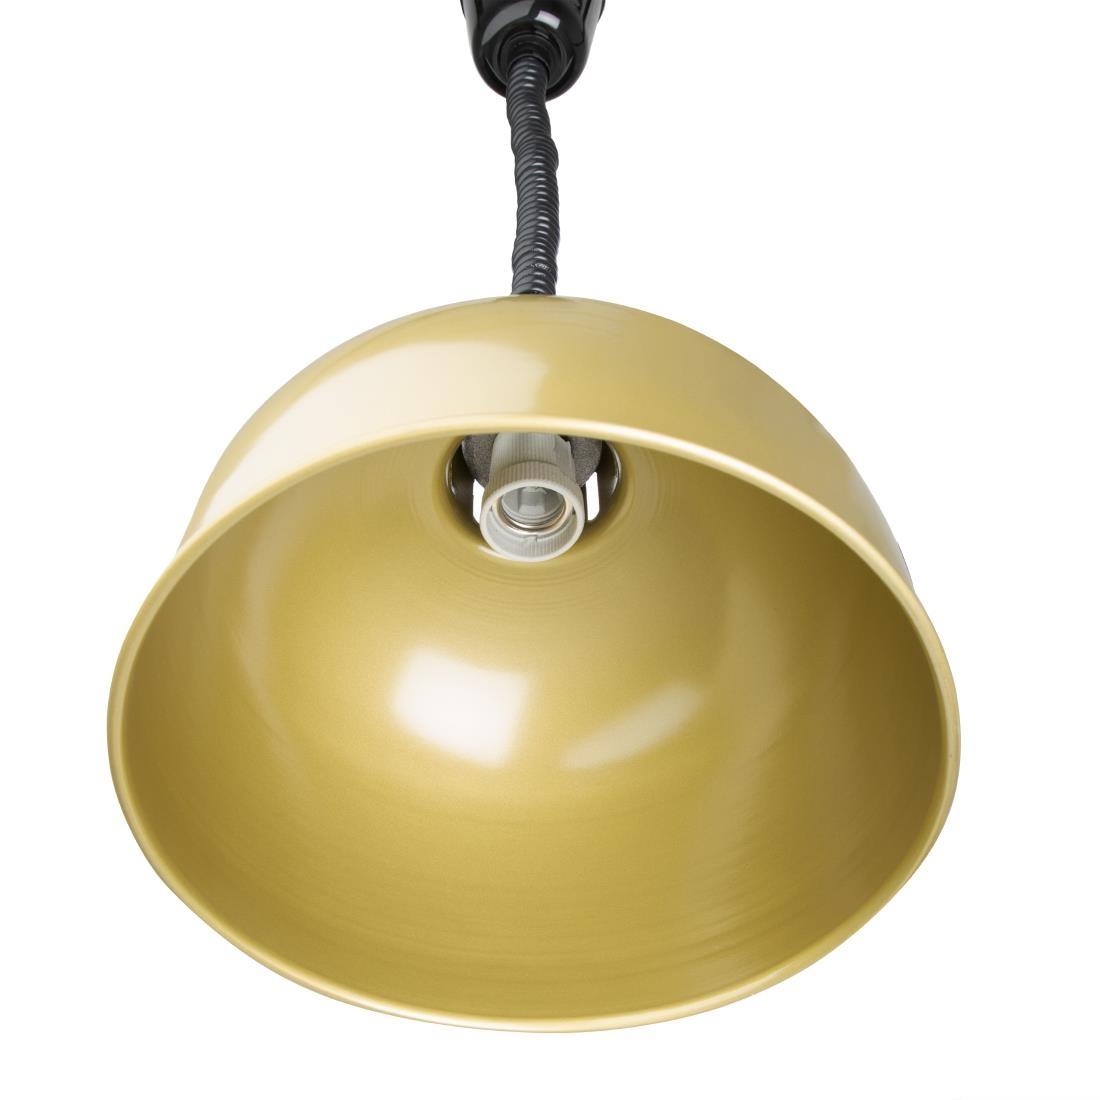 Buffalo Retractable Dome Heat Shade Pale Gold Finish - DY462  - 3